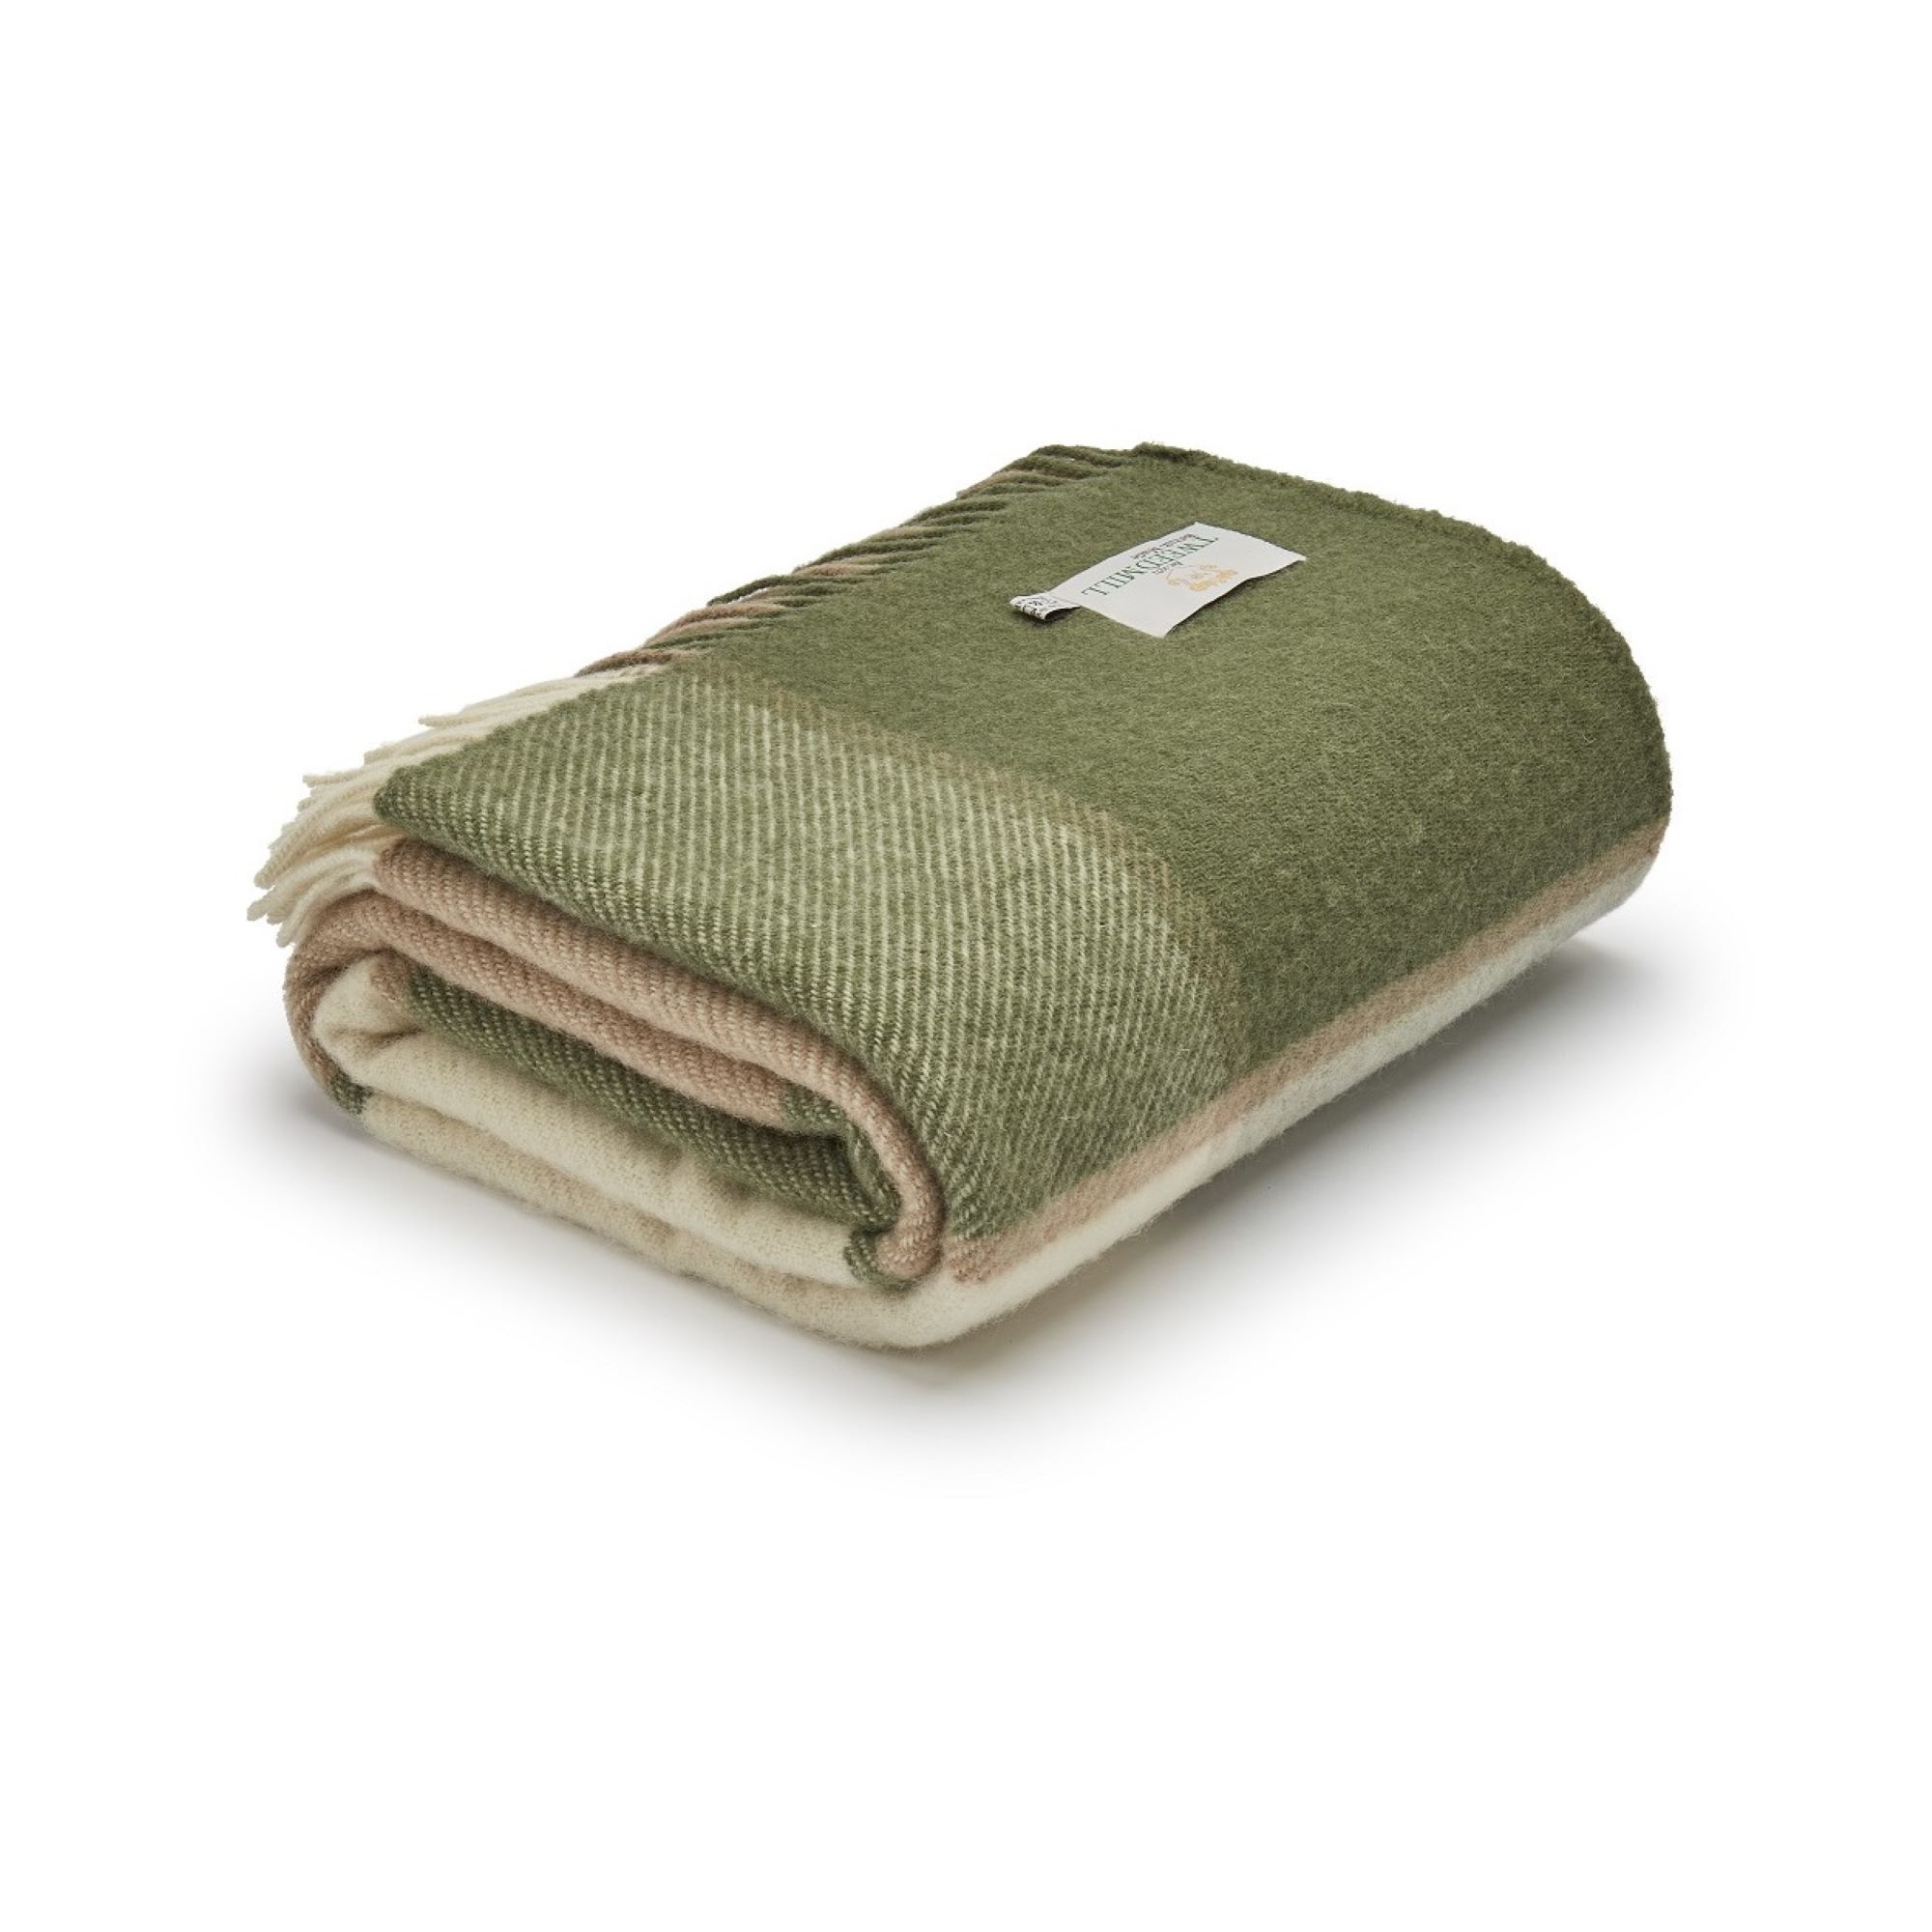 Tweedmill Textiles Olive Green Block Check Pure New Wool Throw 